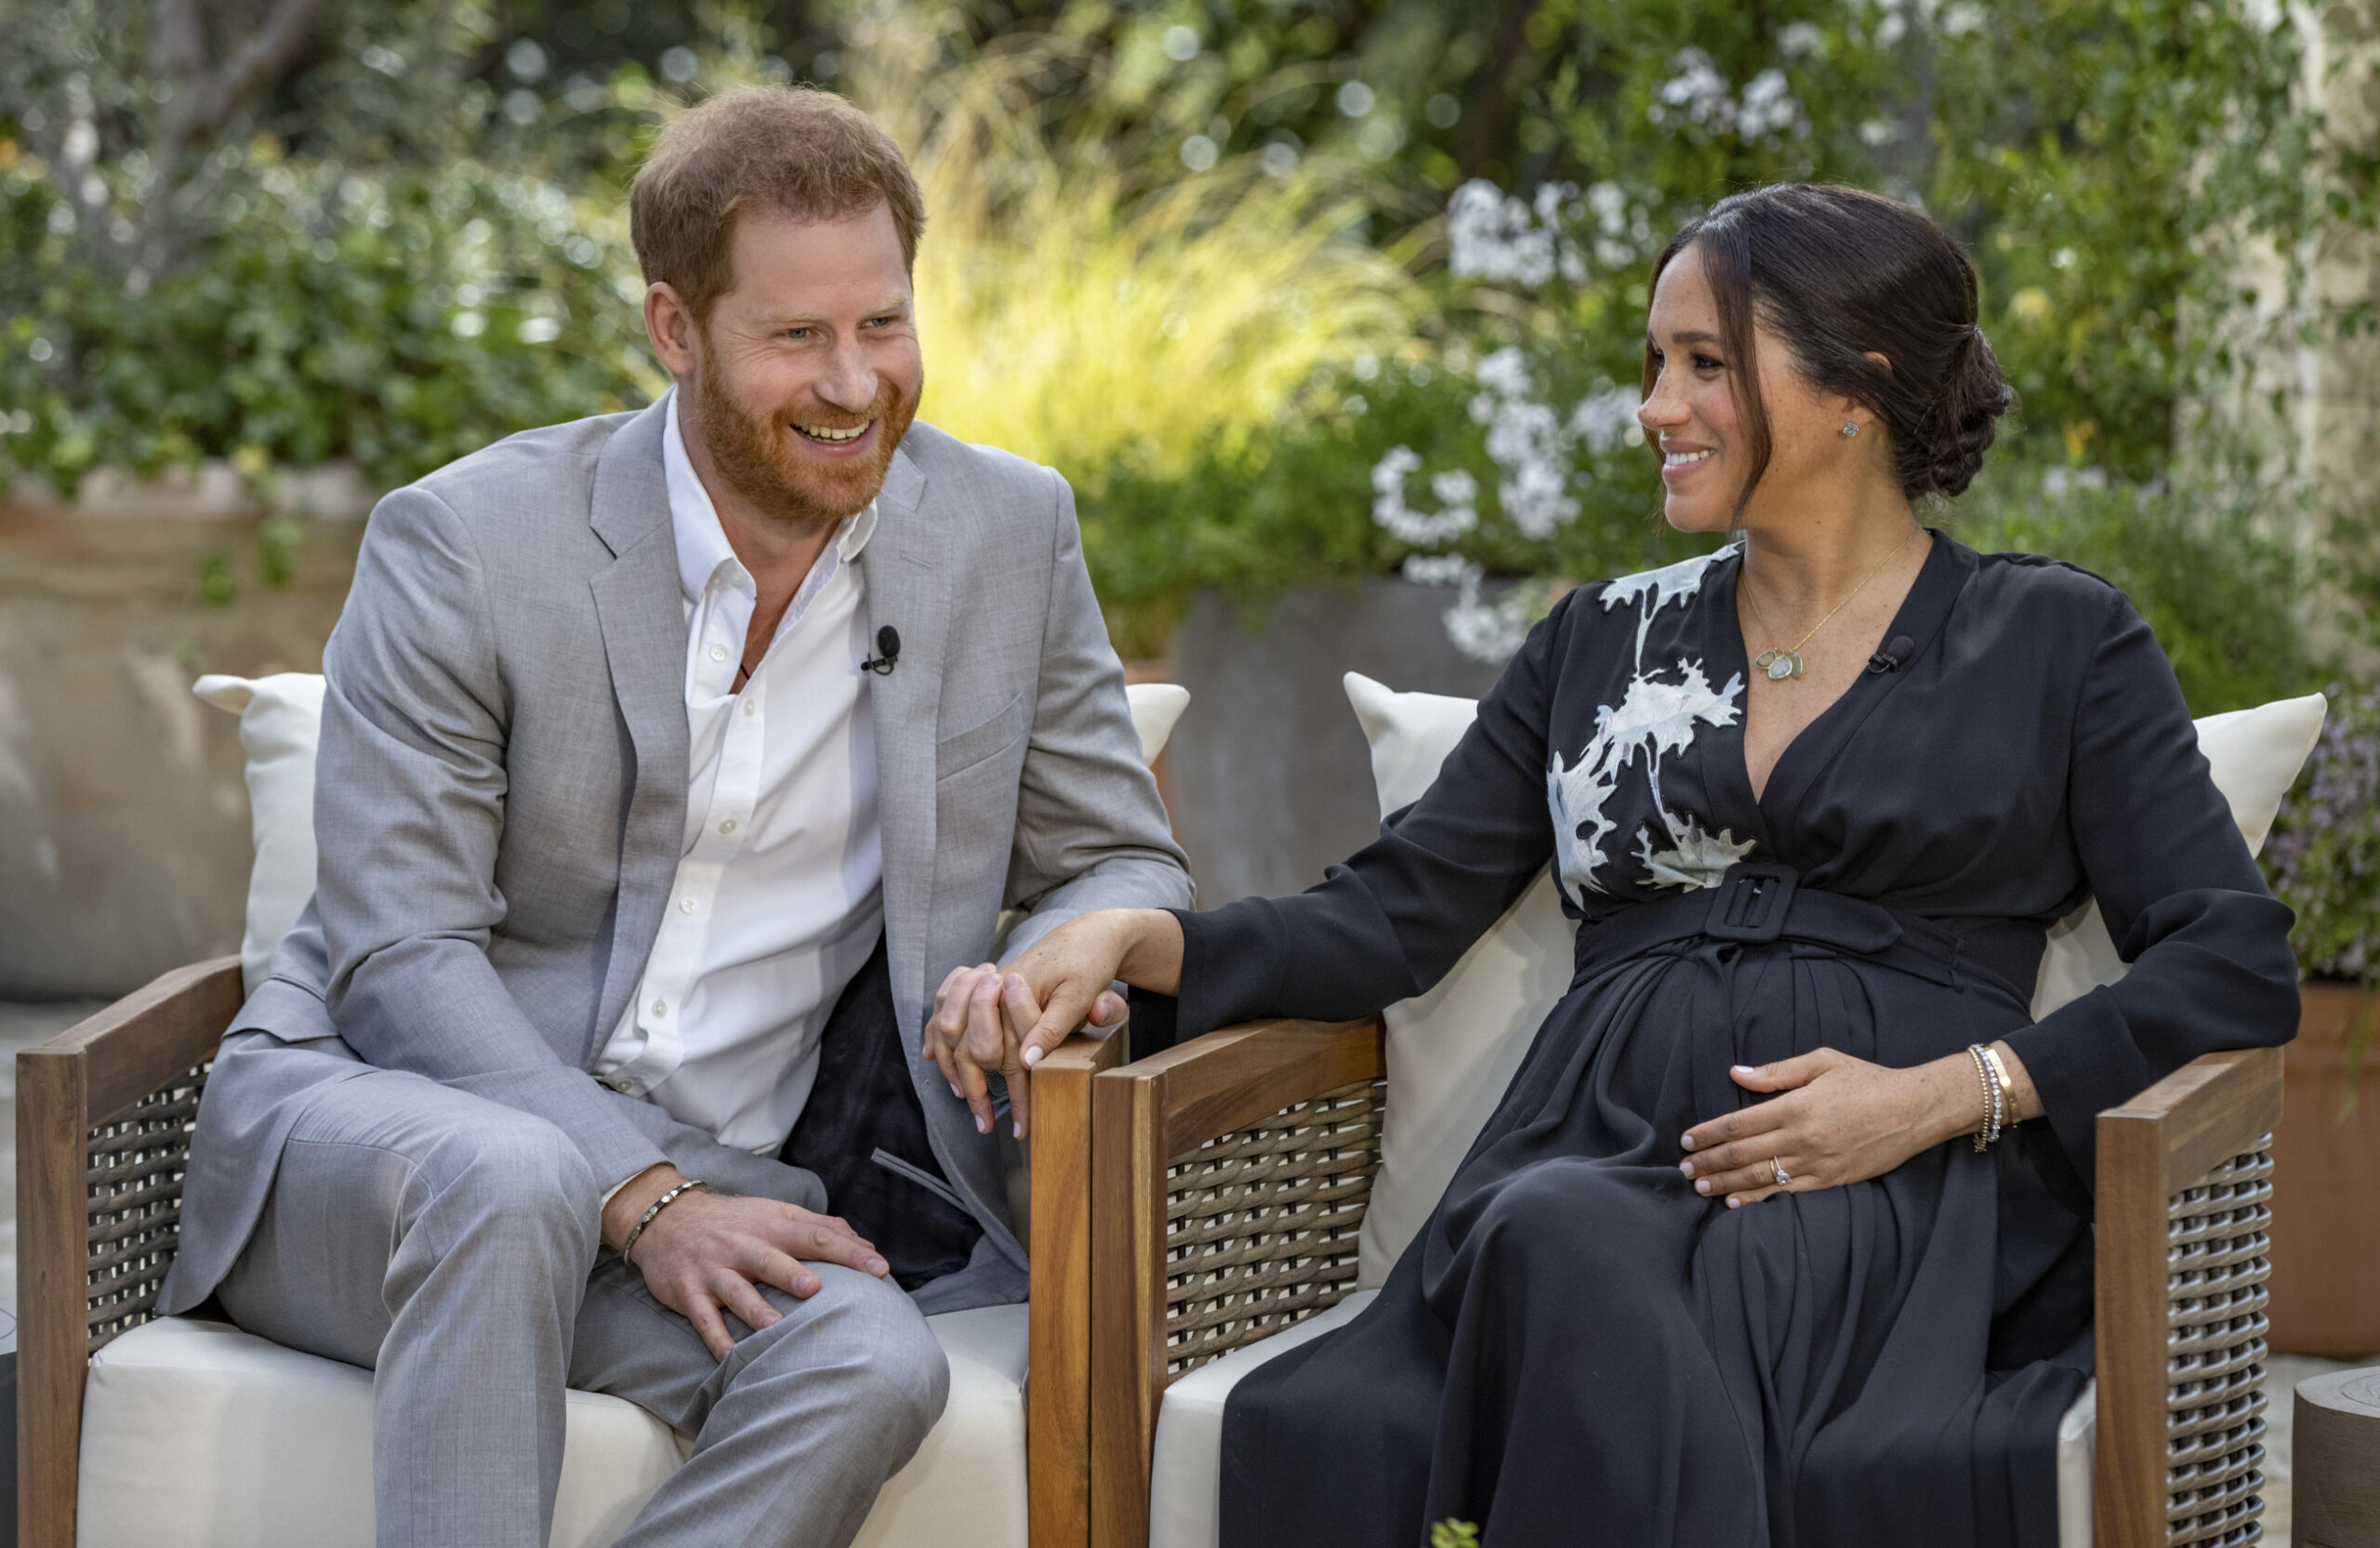 This image provided by Harpo Productions shows Prince Harry, left, and Meghan, Duchess of Sussex, speaking about expecting their second child during an interview with Oprah Winfrey. "Oprah with Meghan and Harry: A CBS Primetime Special" airs March 7 as a two-hour exclusive primetime special on the CBS Television Network. (Joe Pugliese/Harpo Productions via AP)